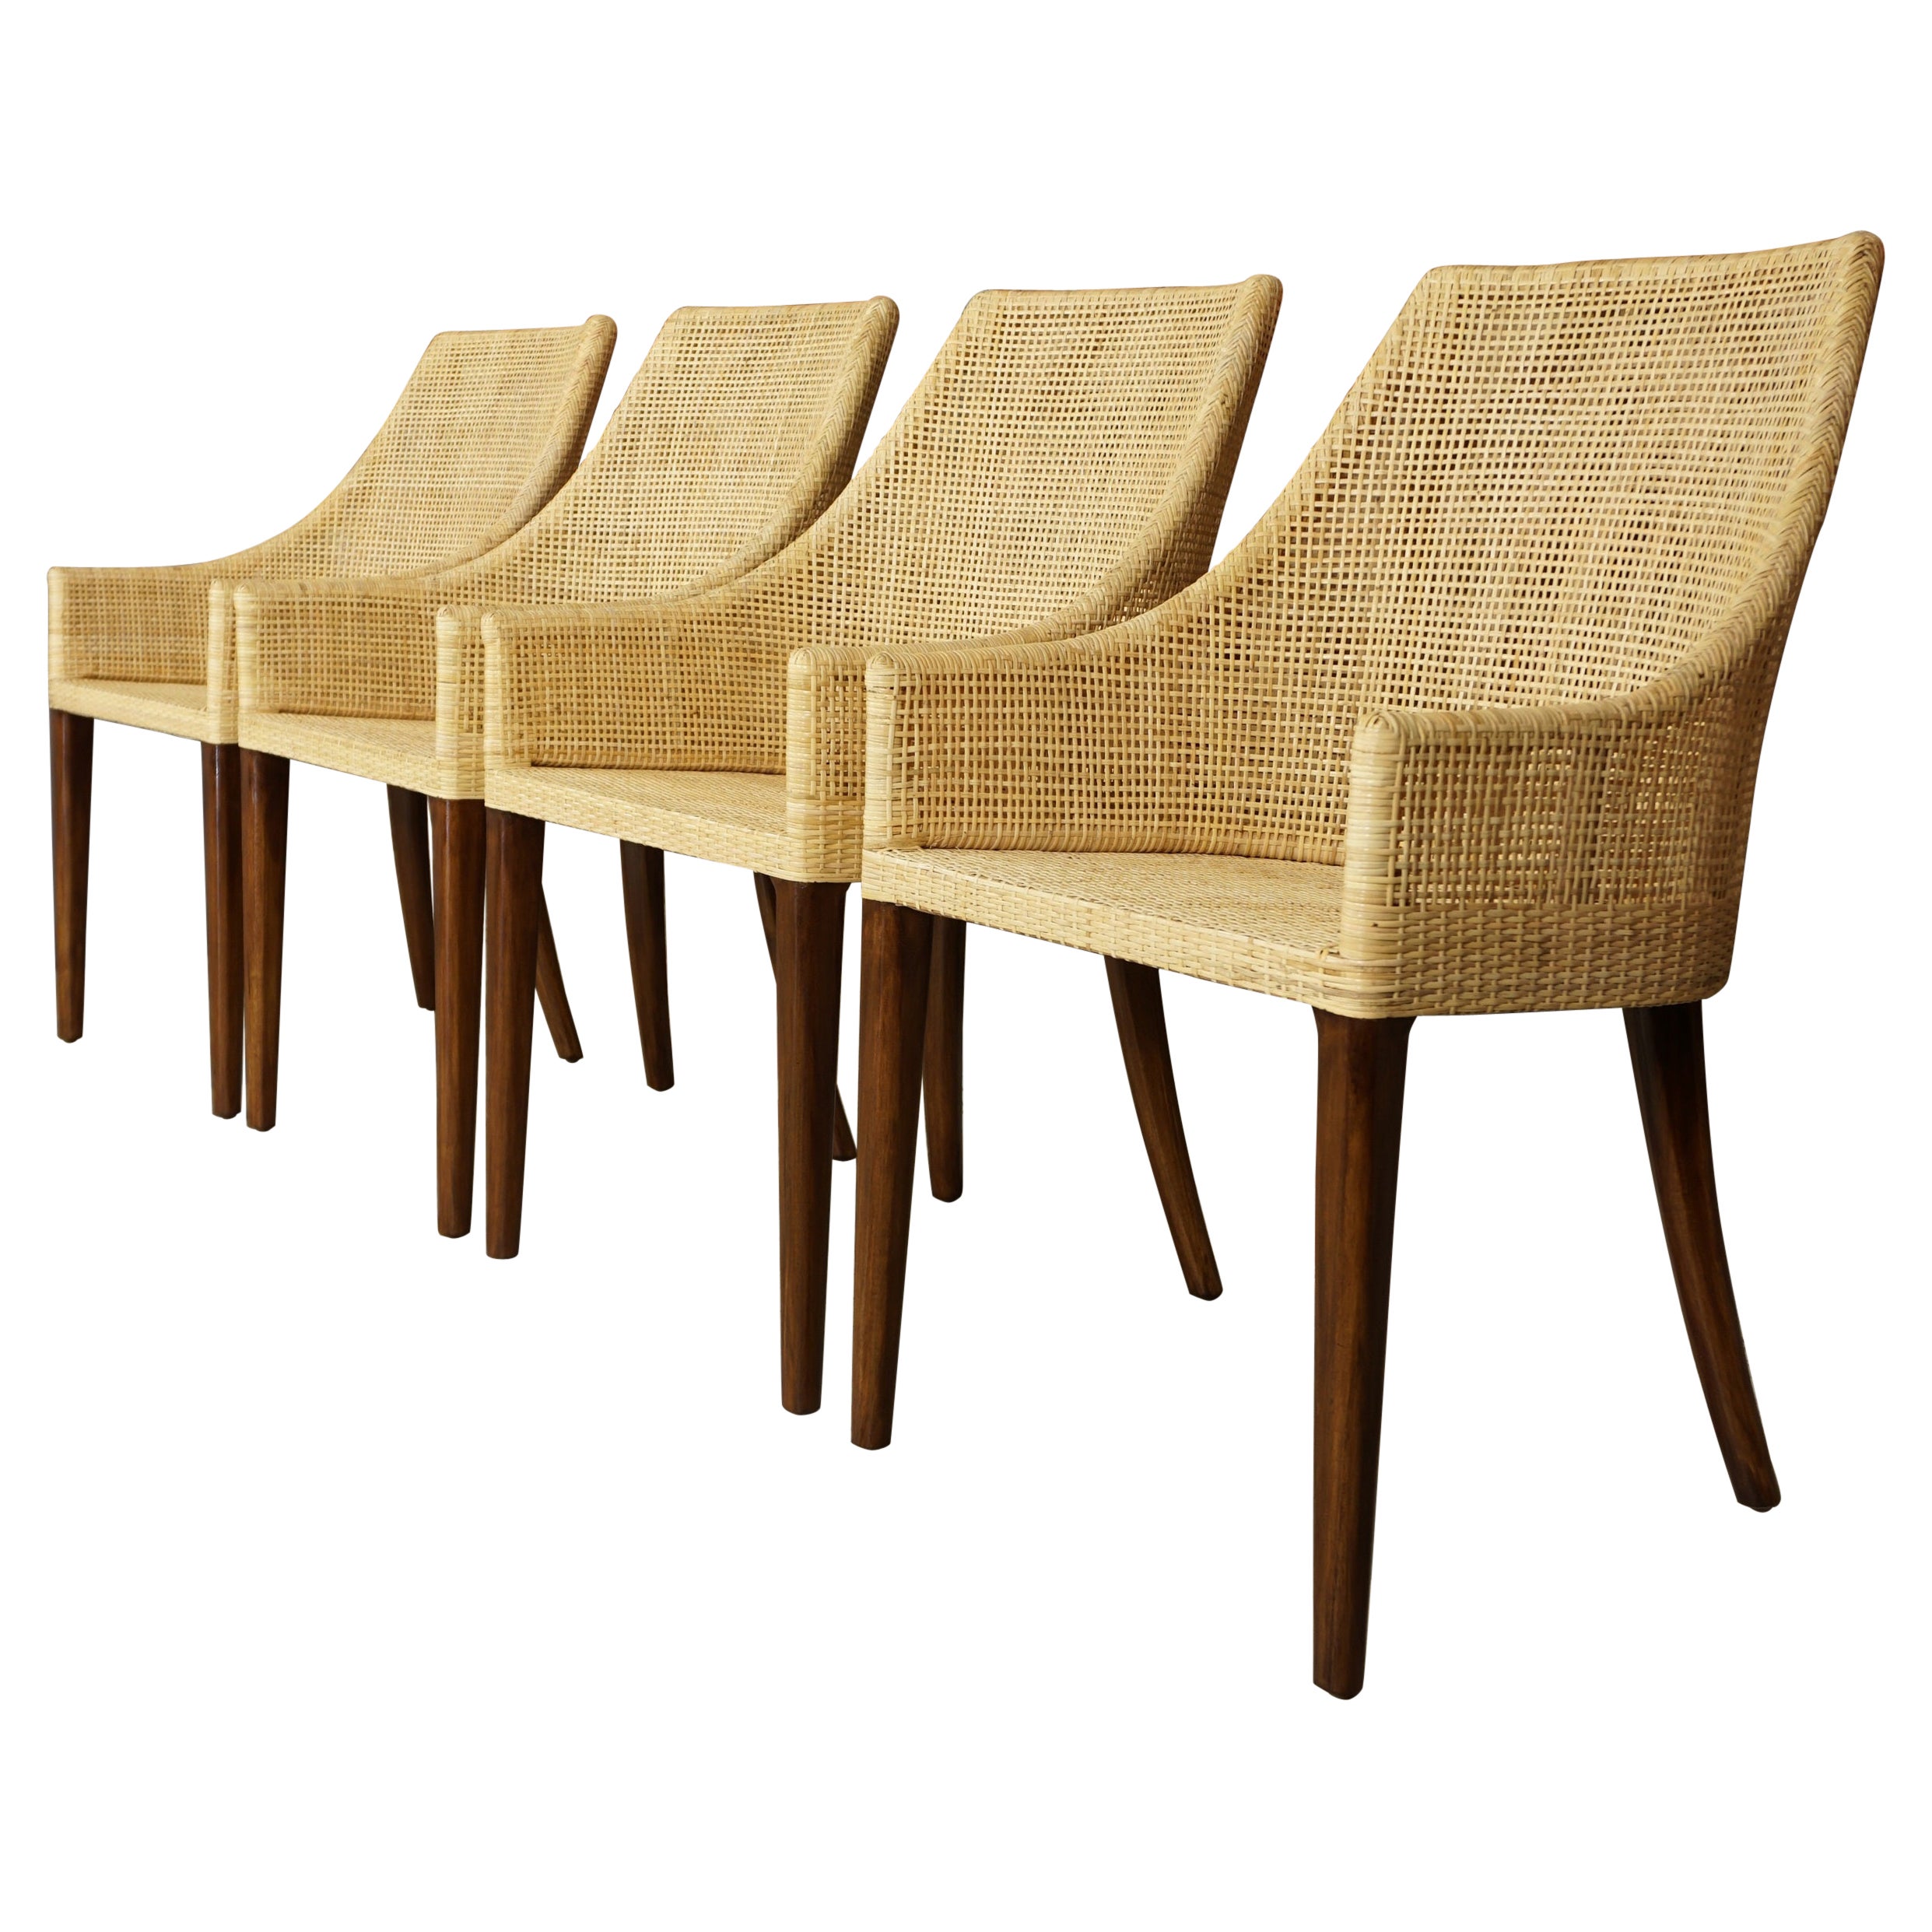 French Design Rattan and Wooden Set of 4 Chairs For Sale